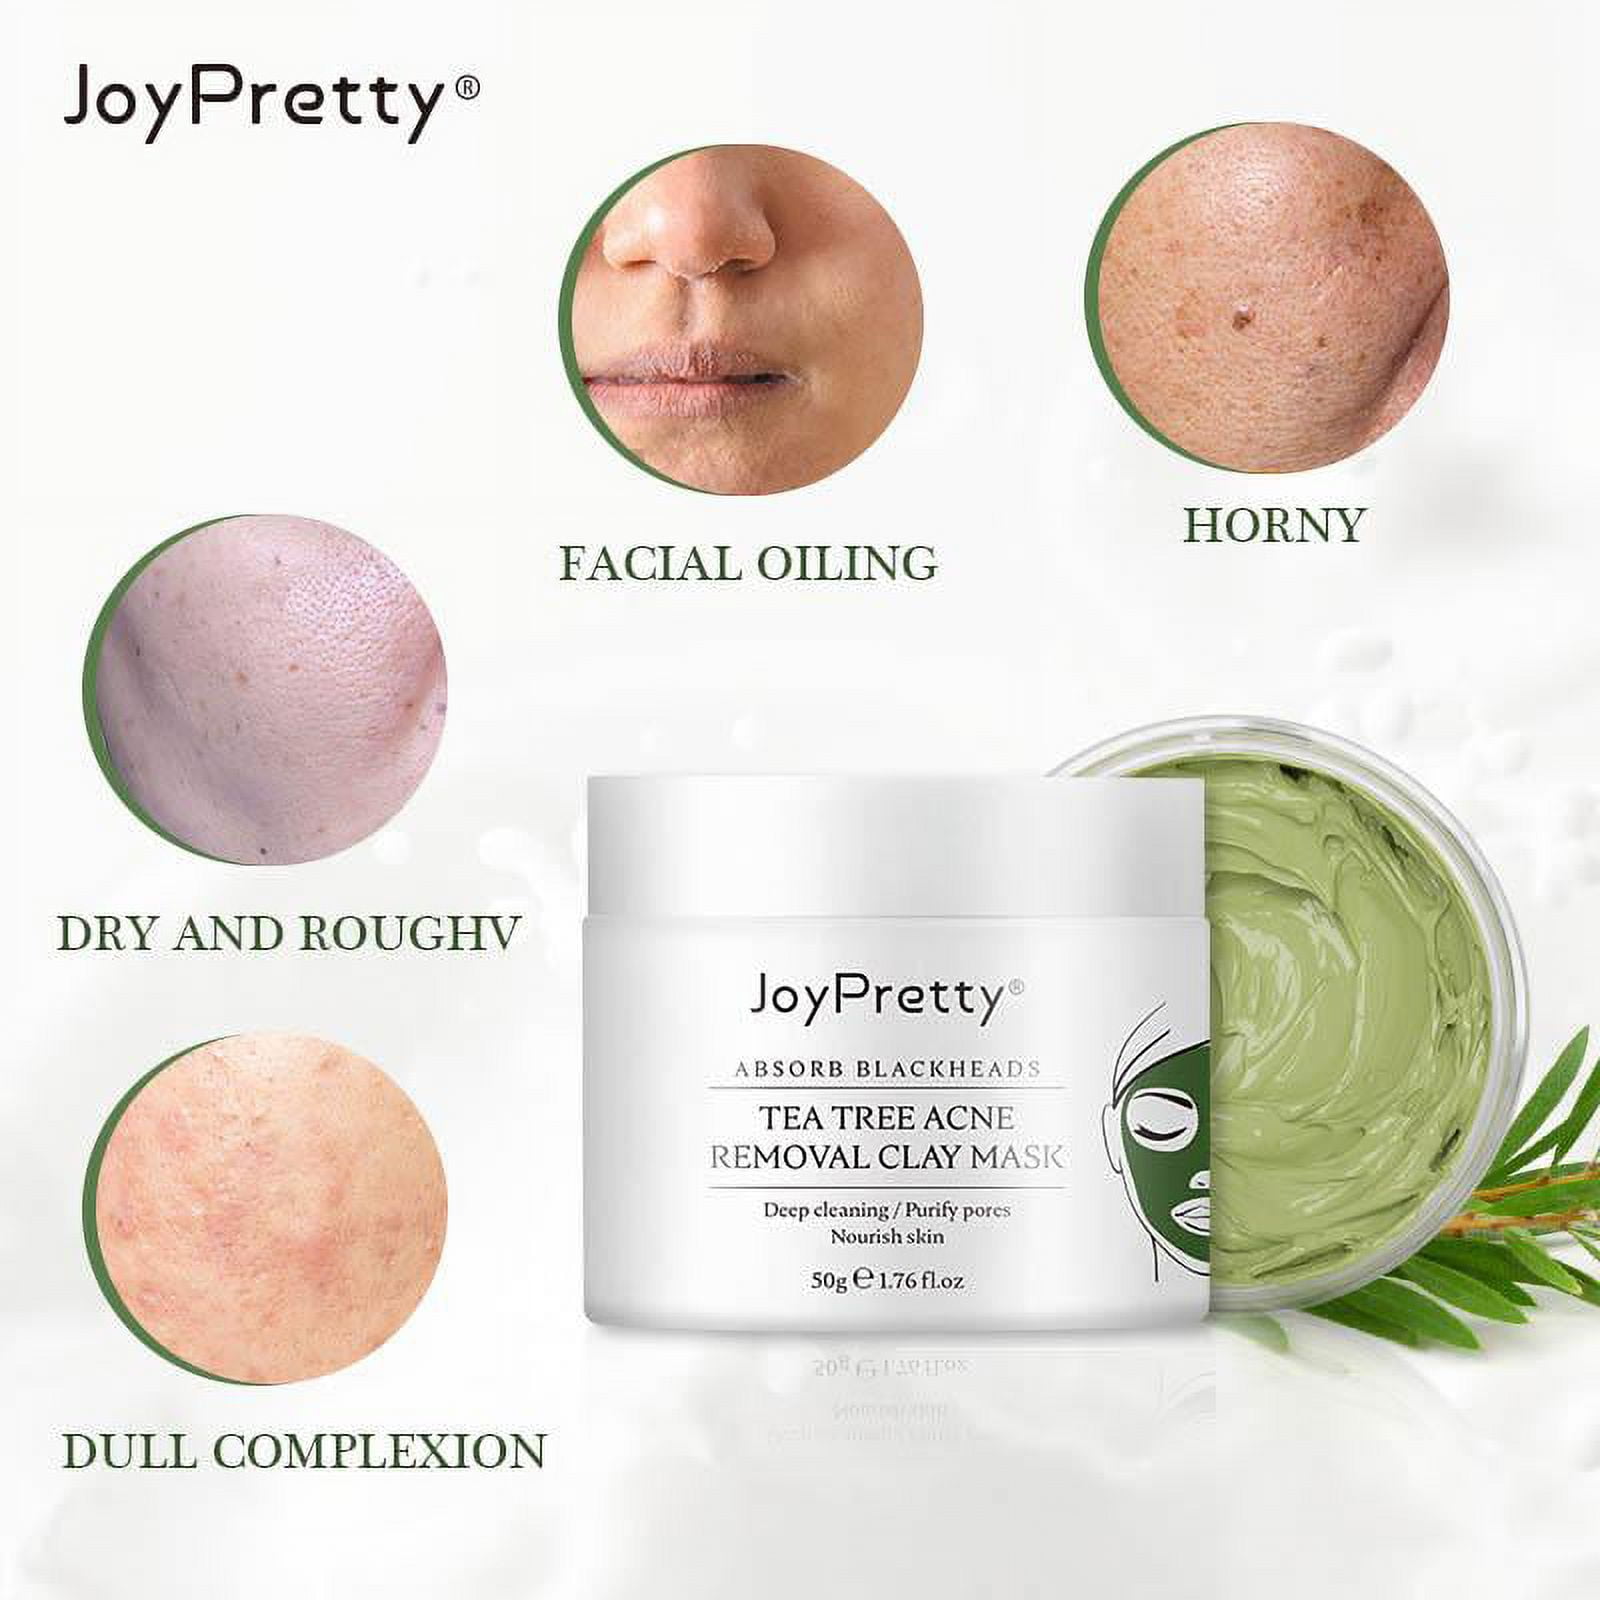 Tea Tree Acne Removal Clay Mask